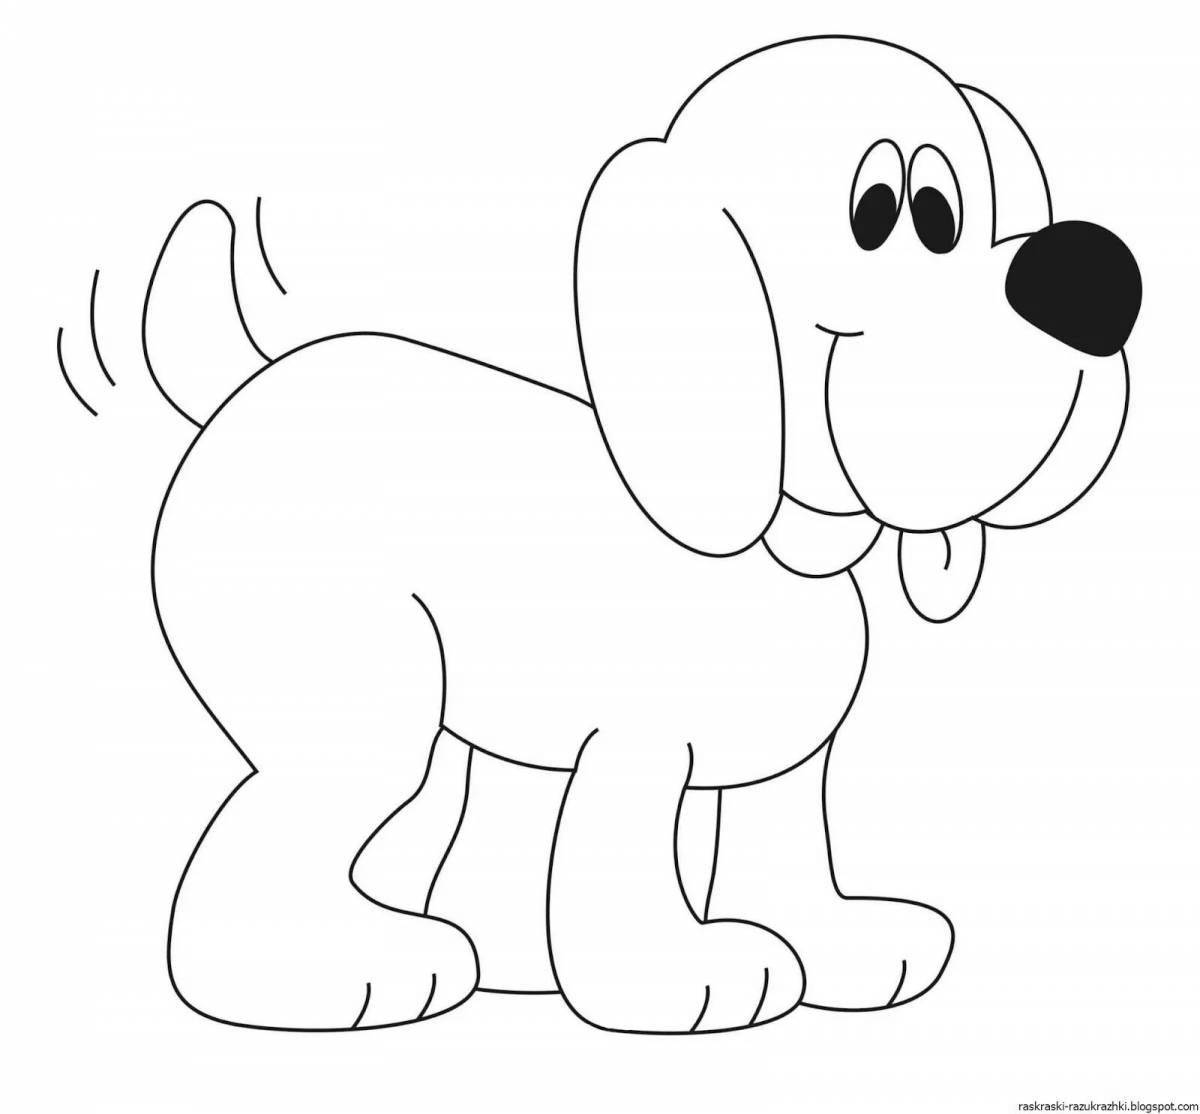 Colorful dog coloring page for kids